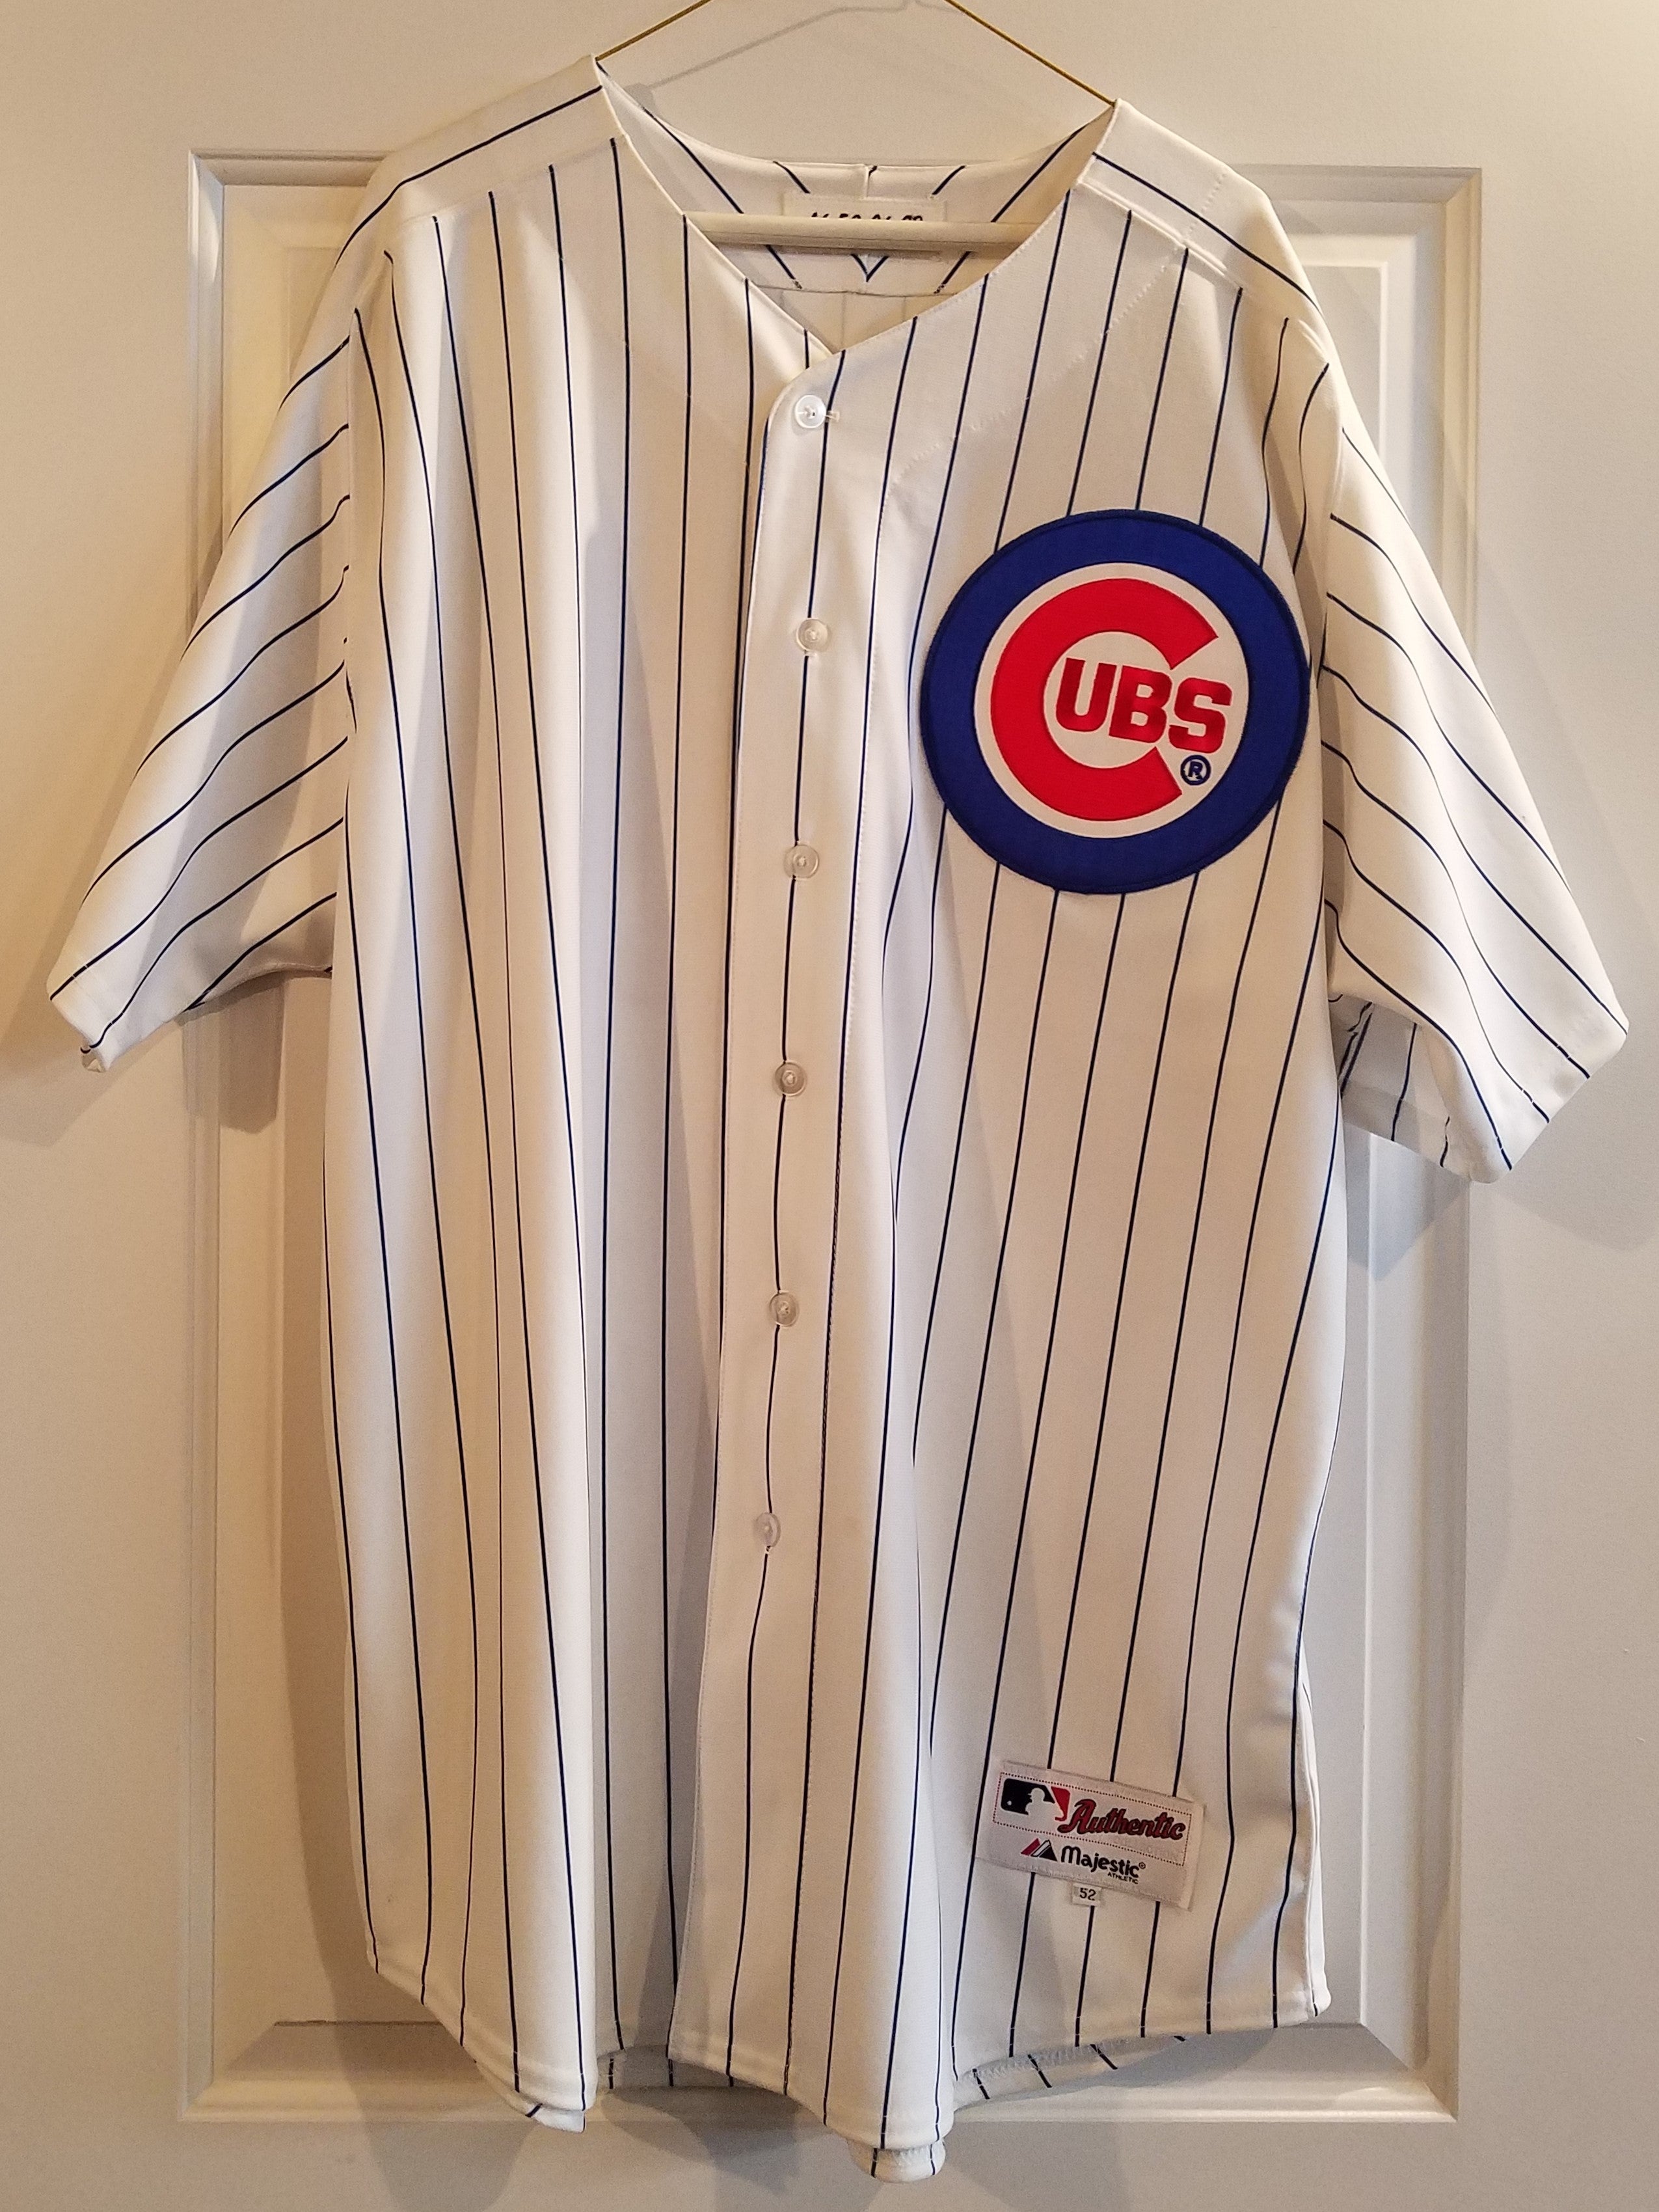 Dusty Baker 2021 World Series Game-Used Jersey